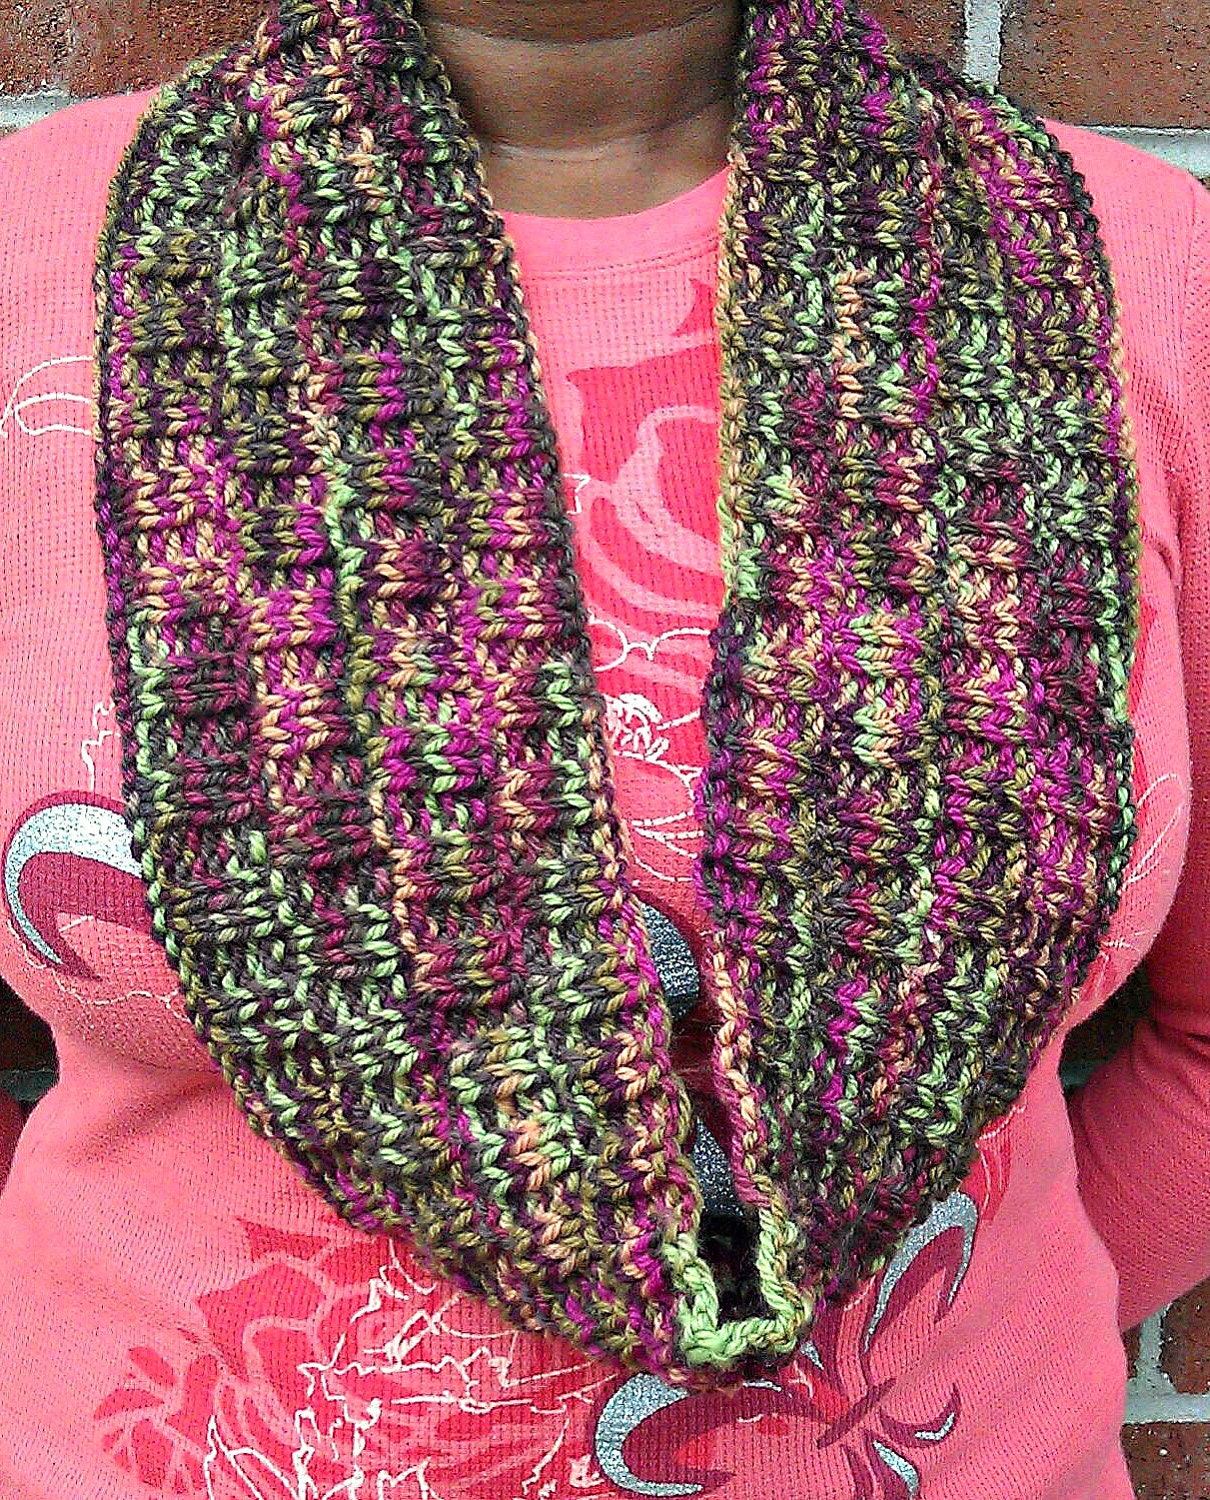 Women's Colorful Wool Cowl, Handknit Infinity Scarf, Knit Circle Scarf